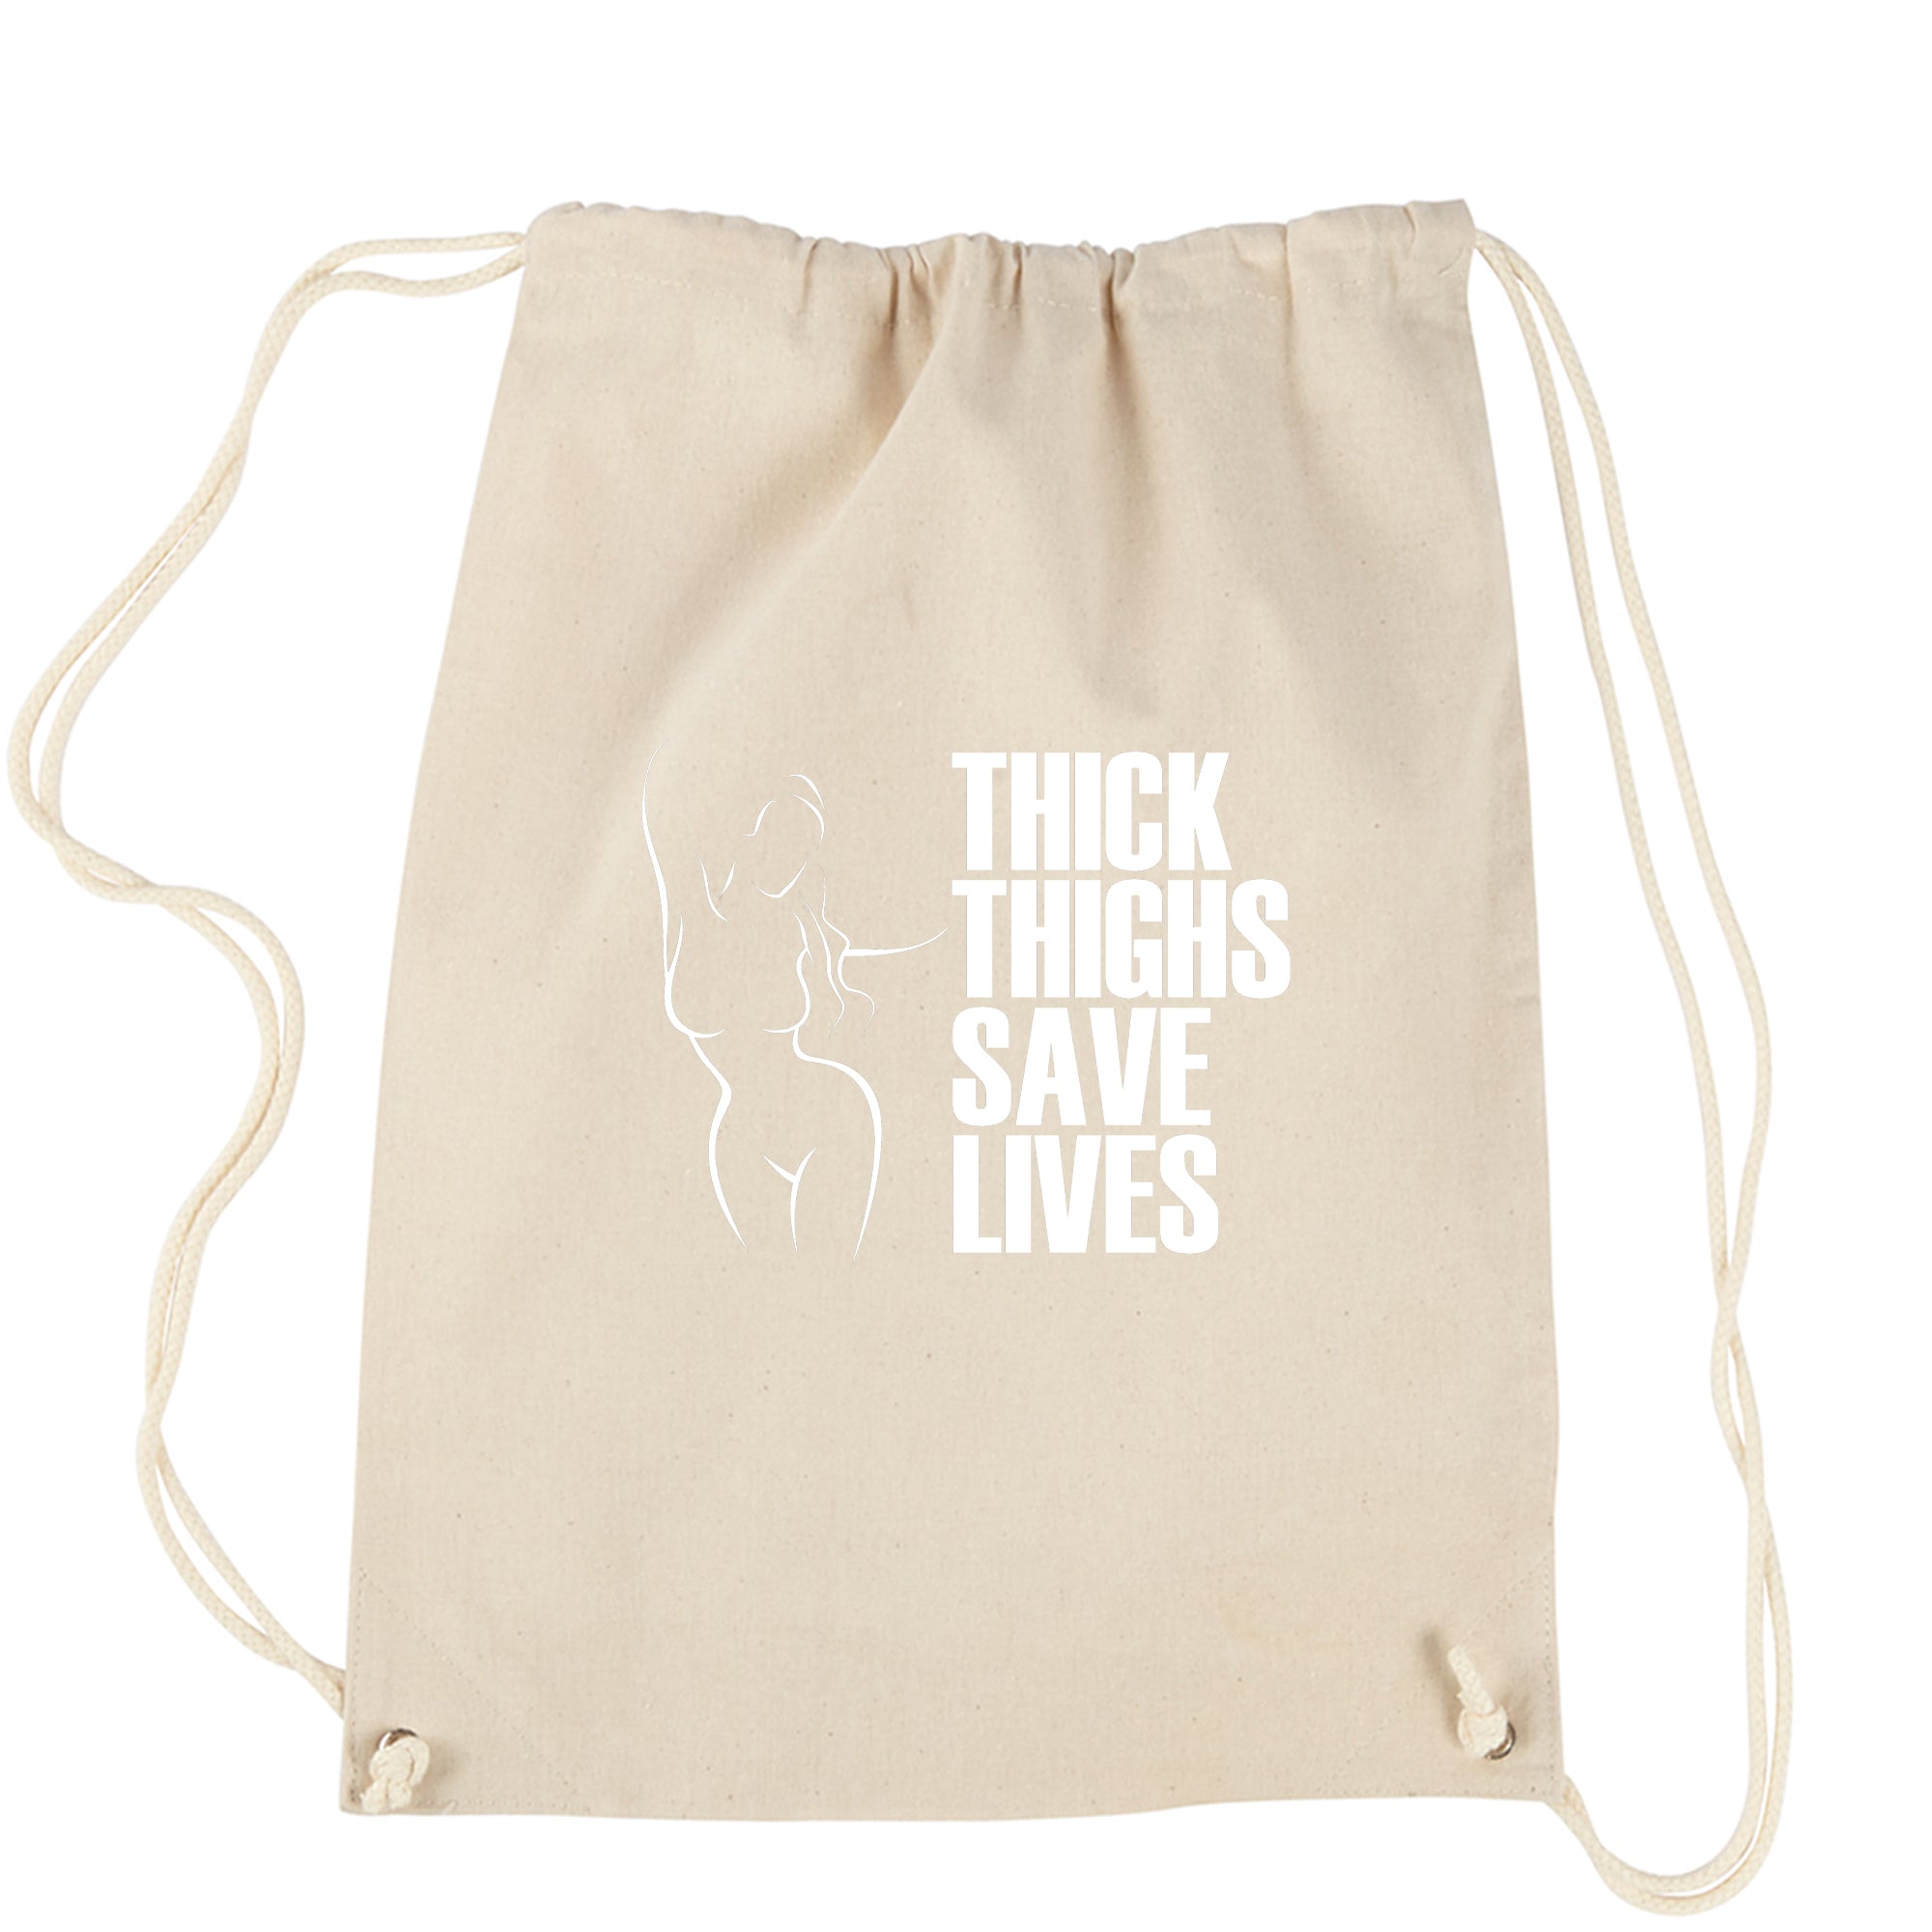 Thick Thighs Save Lives Drawstring Backpack